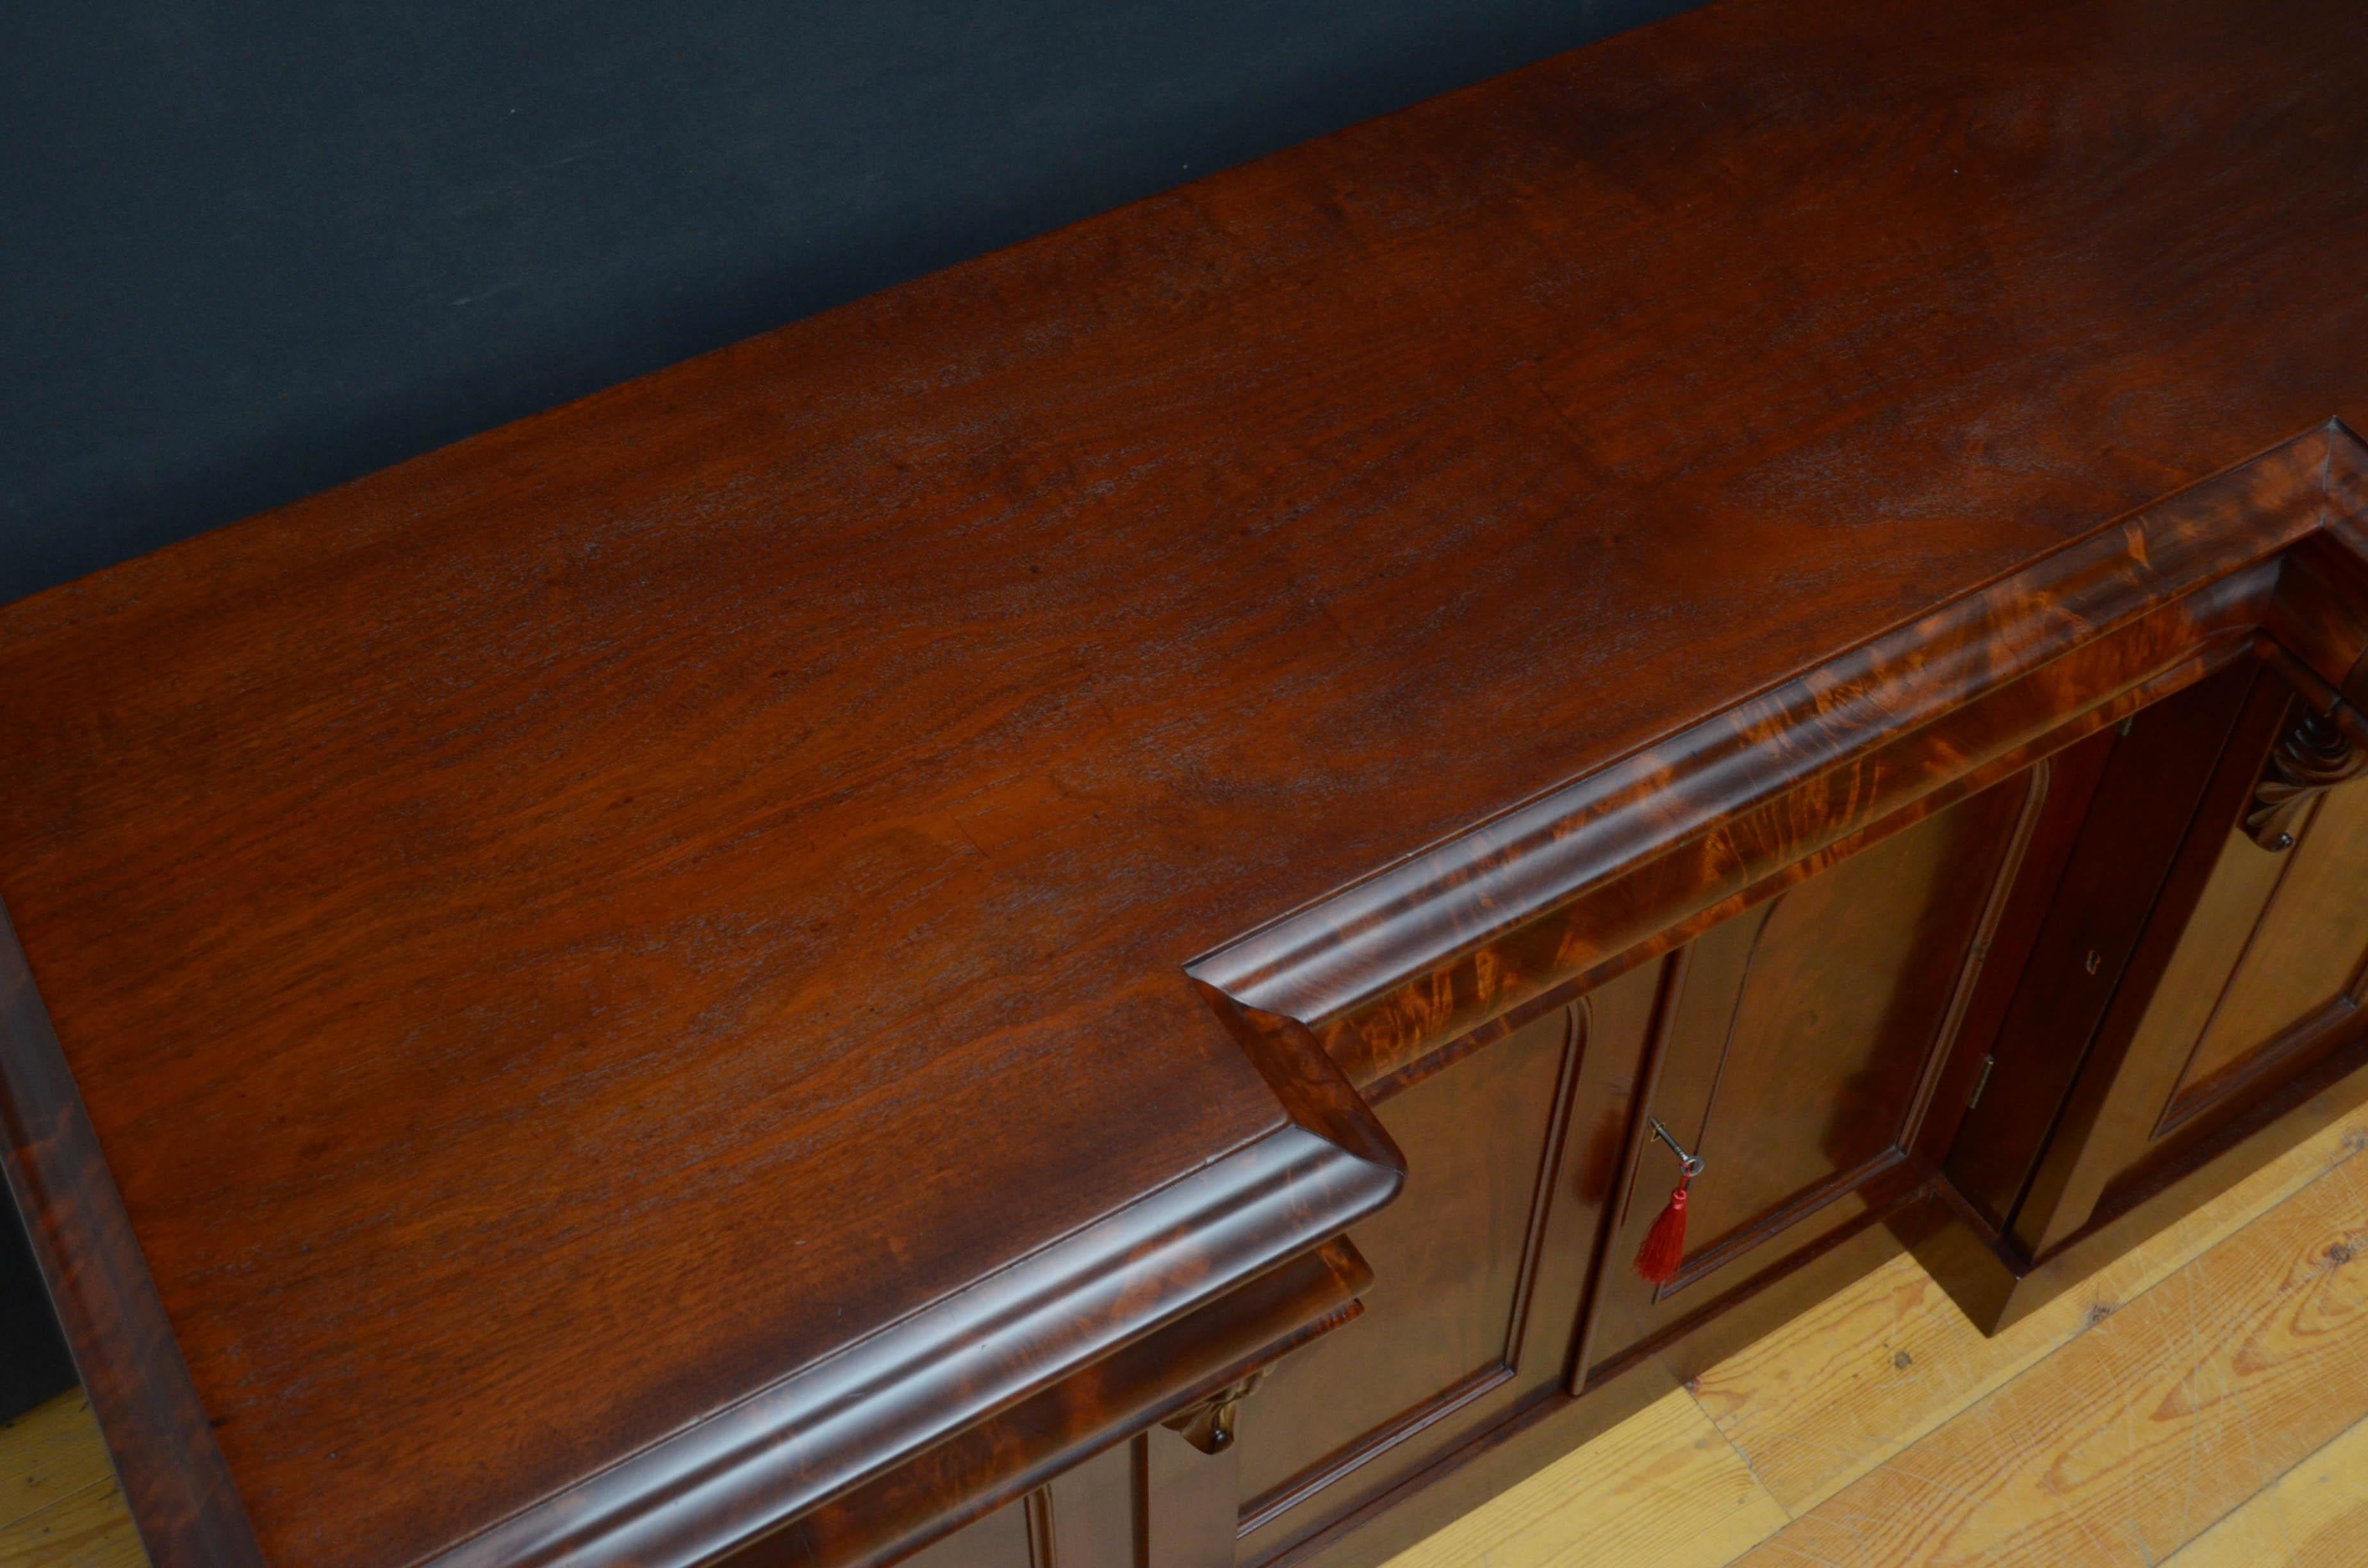 Sn4849, superb Victorian mahogany, break fronted sideboard, having figured mahogany top with moulded edge above 3 mahogany lined flamed mahogany drawers and a pair of flamed mahogany arched cabinet door fitted with working lock and a key and